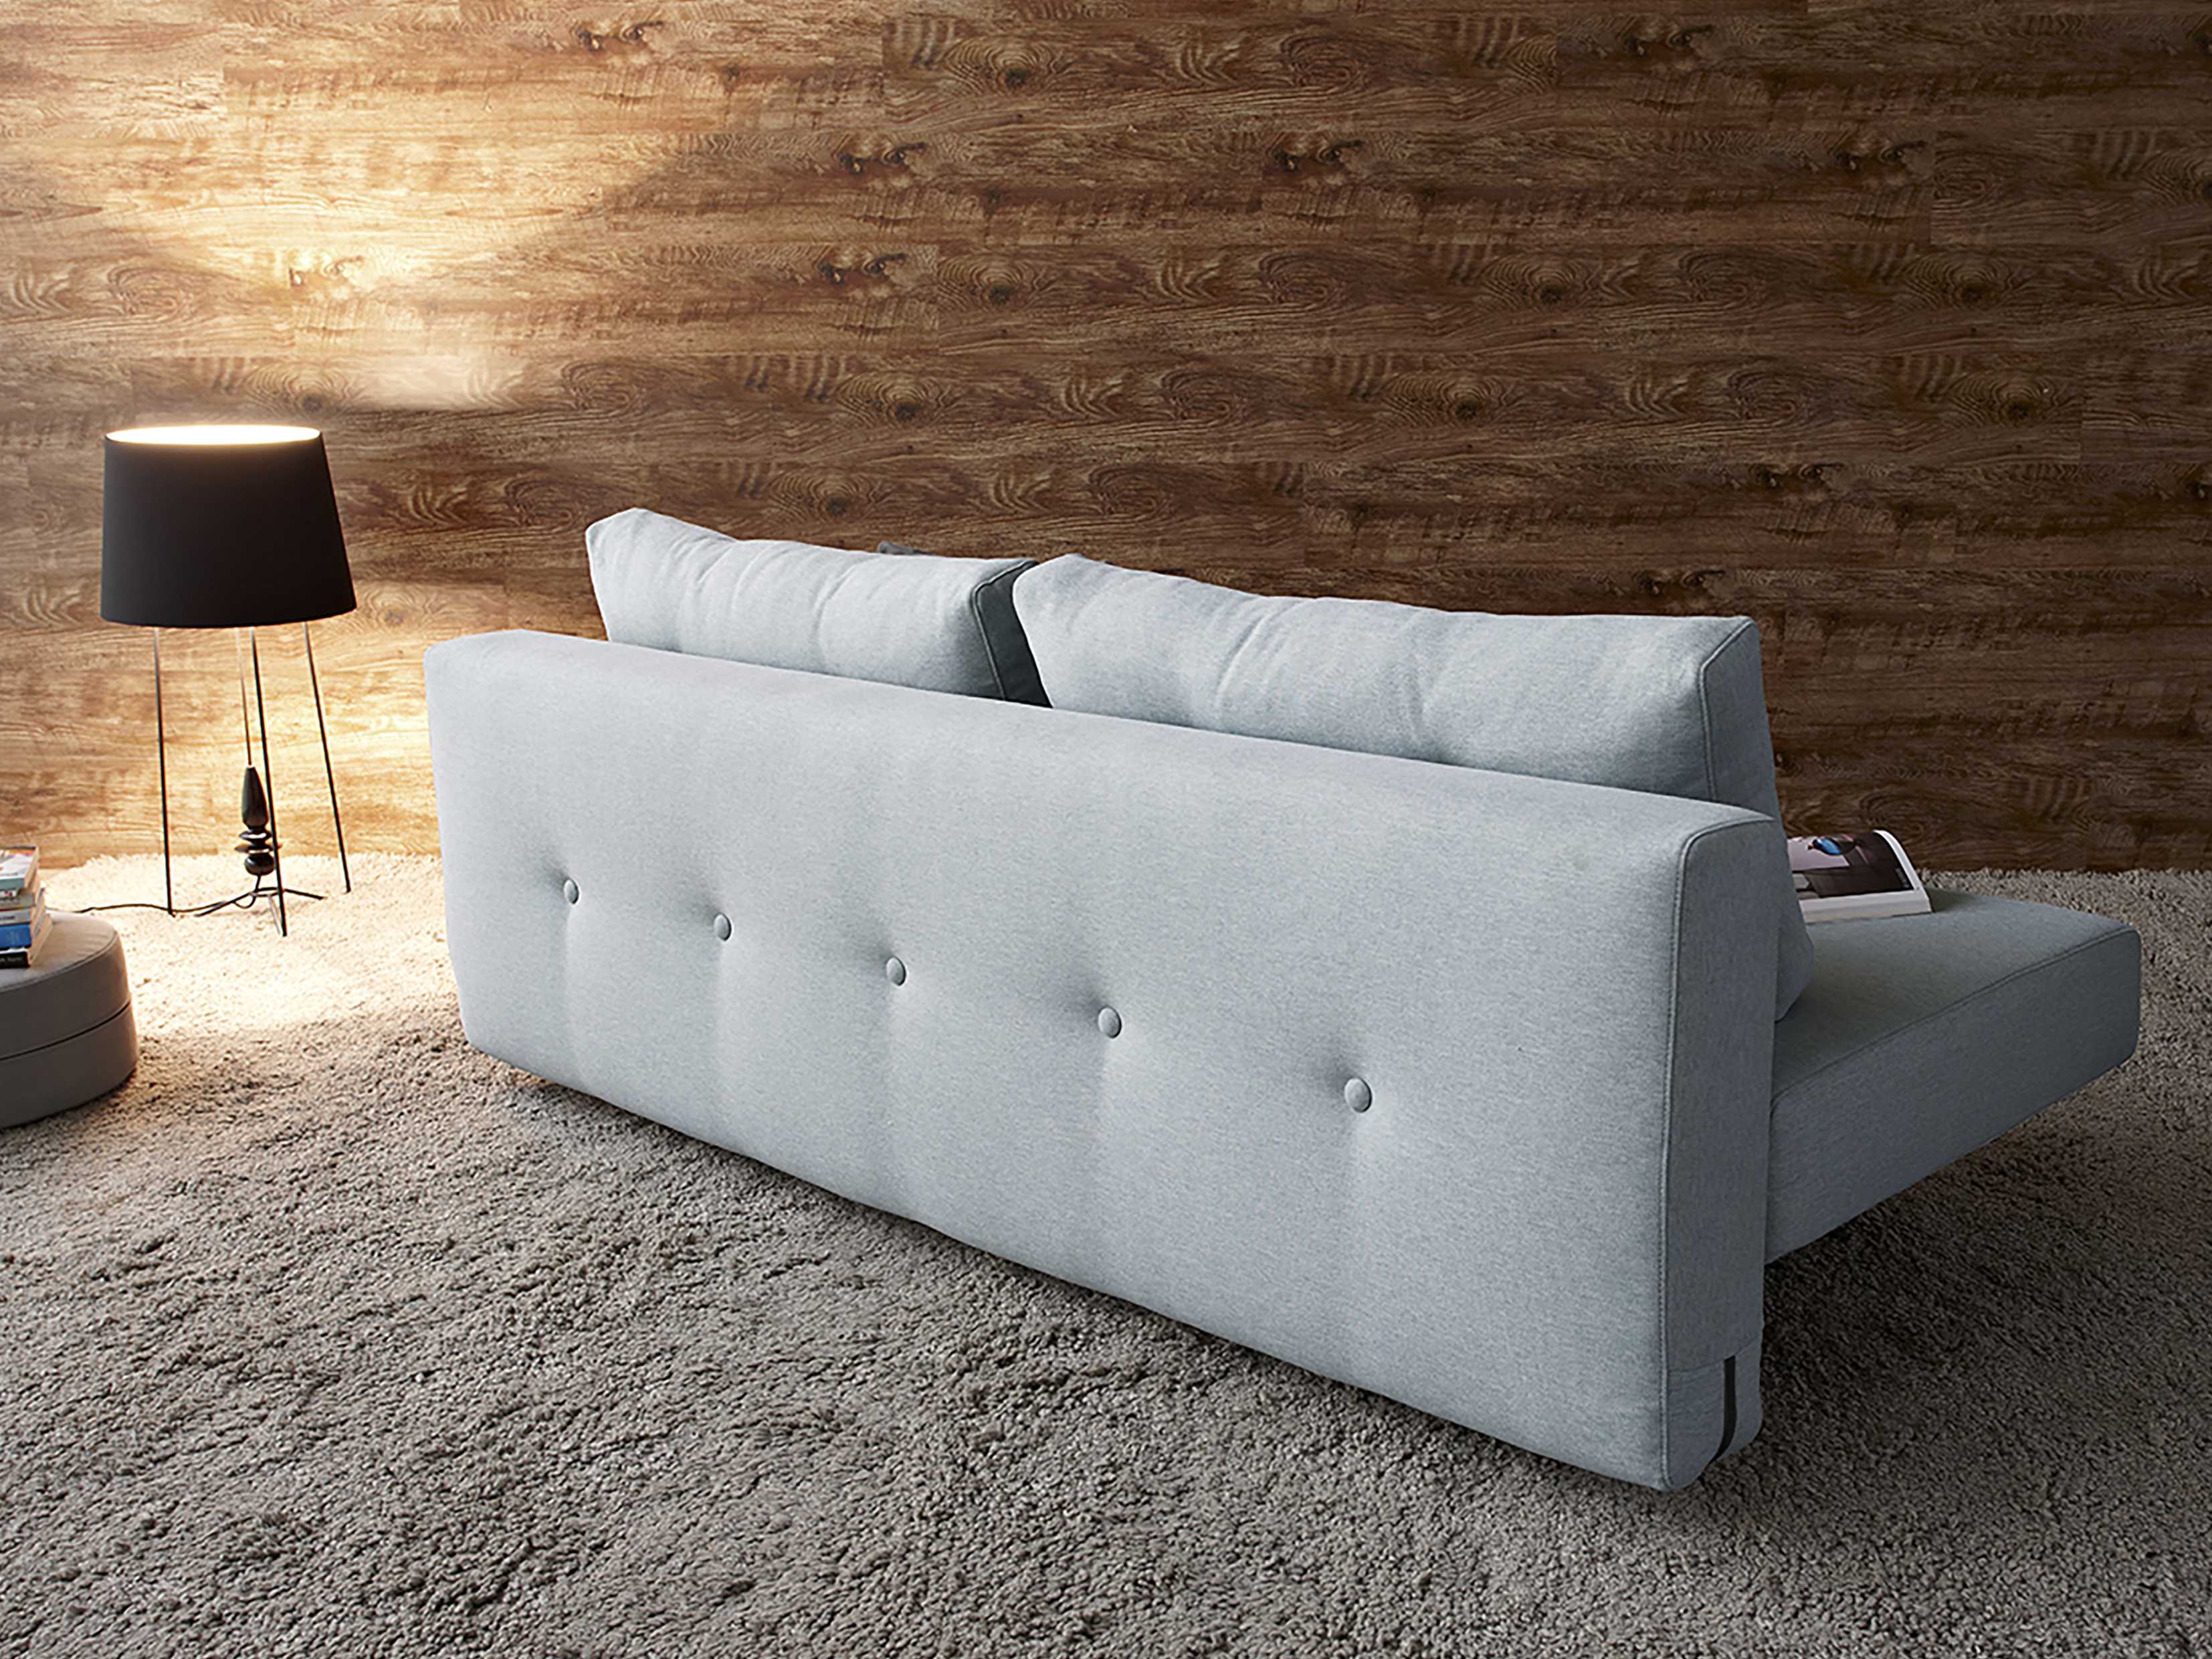 ideas to pad sofa bed legs